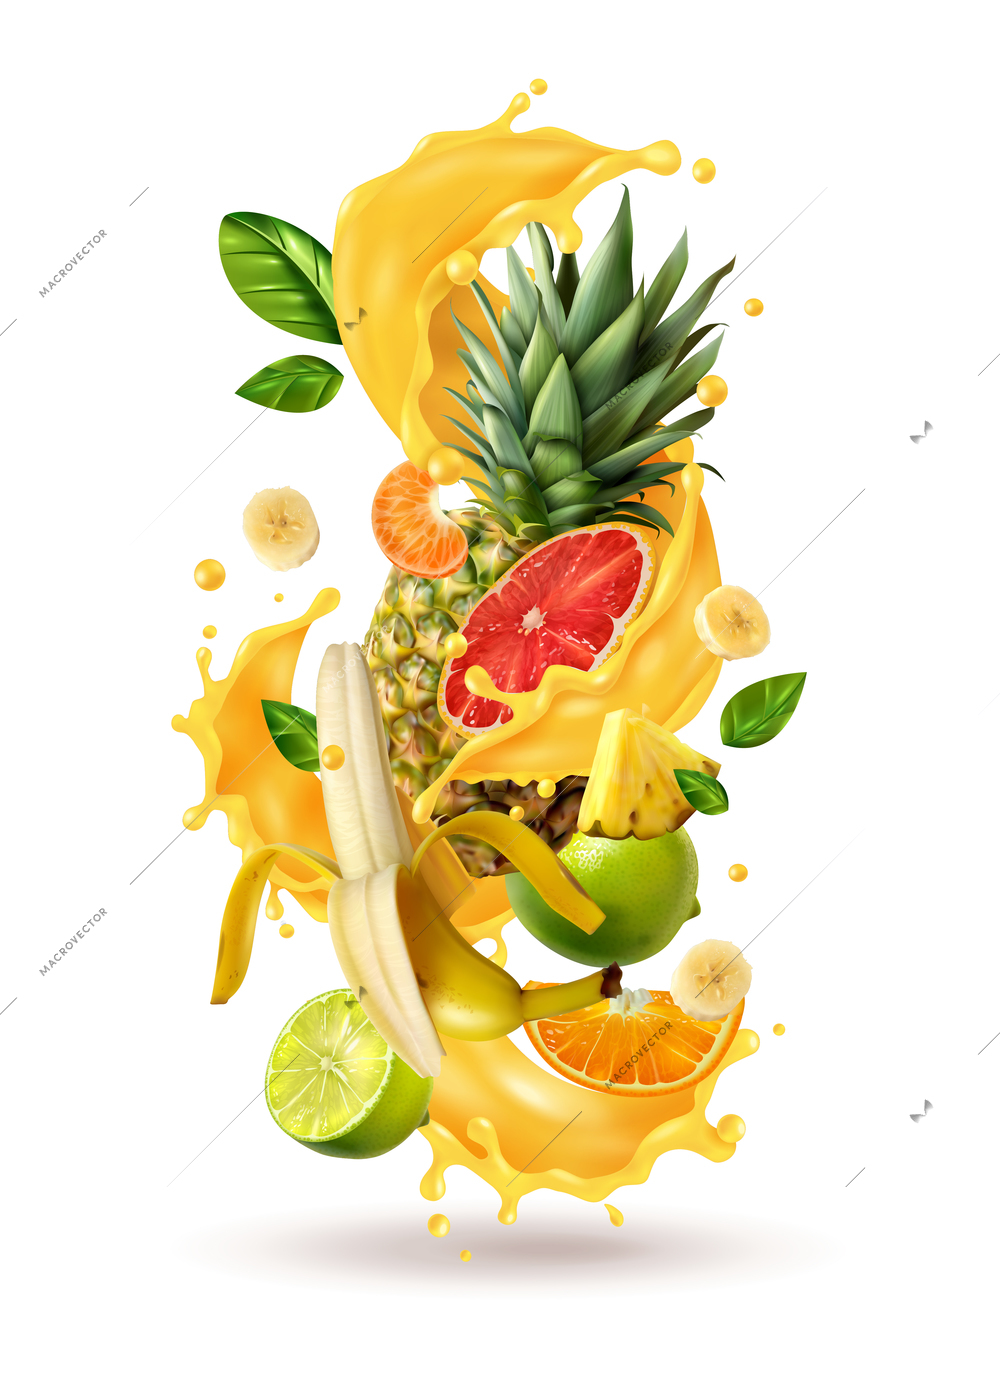 Realistic ftuiys juice splash burst composition with spray images and ripe tropical fruits on blank background vector illustration